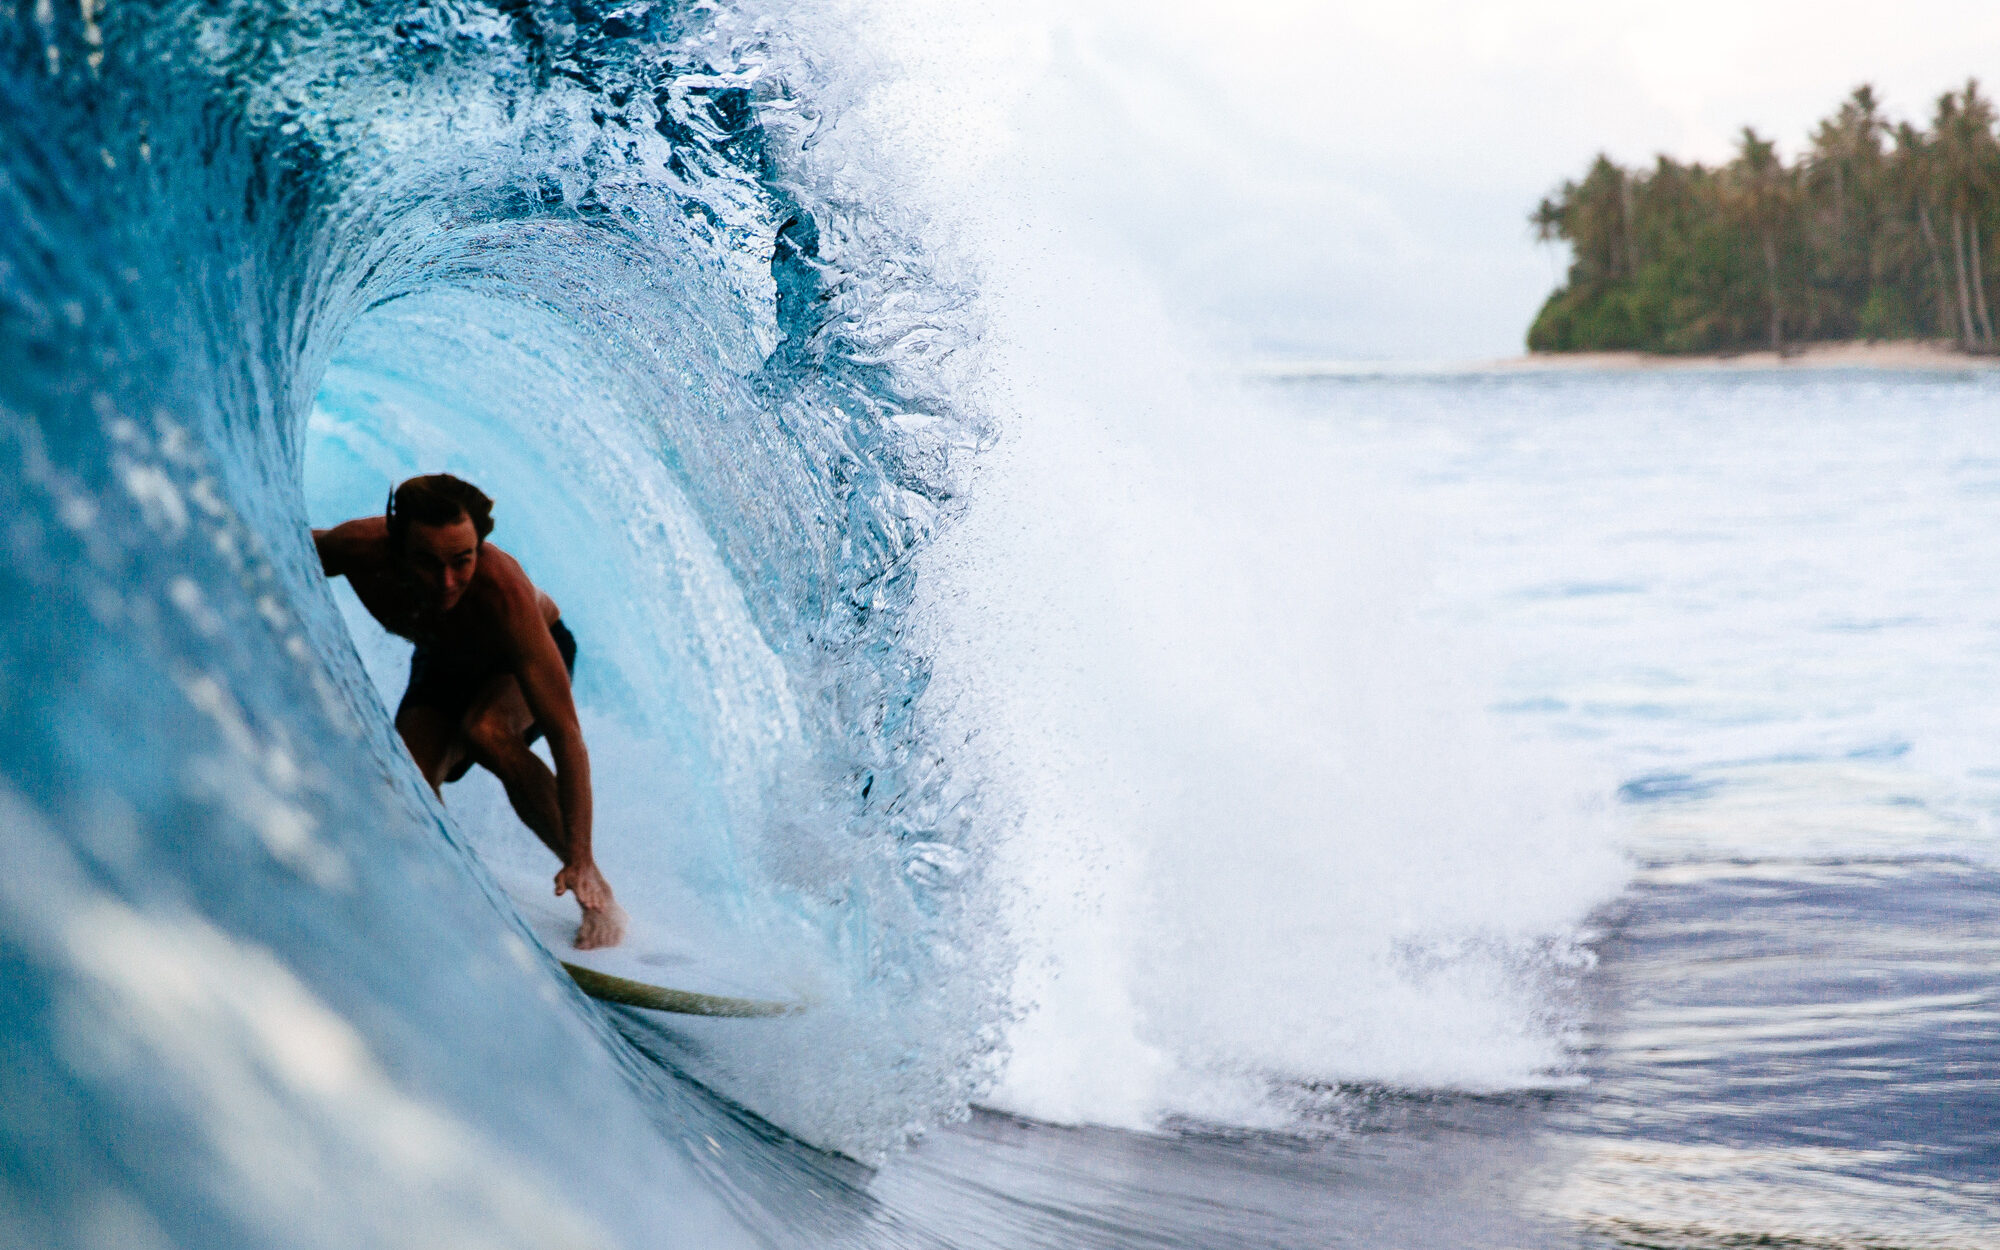 Surfer catching a perfect barrel at Hollow Tree's in the Mentawai Islands